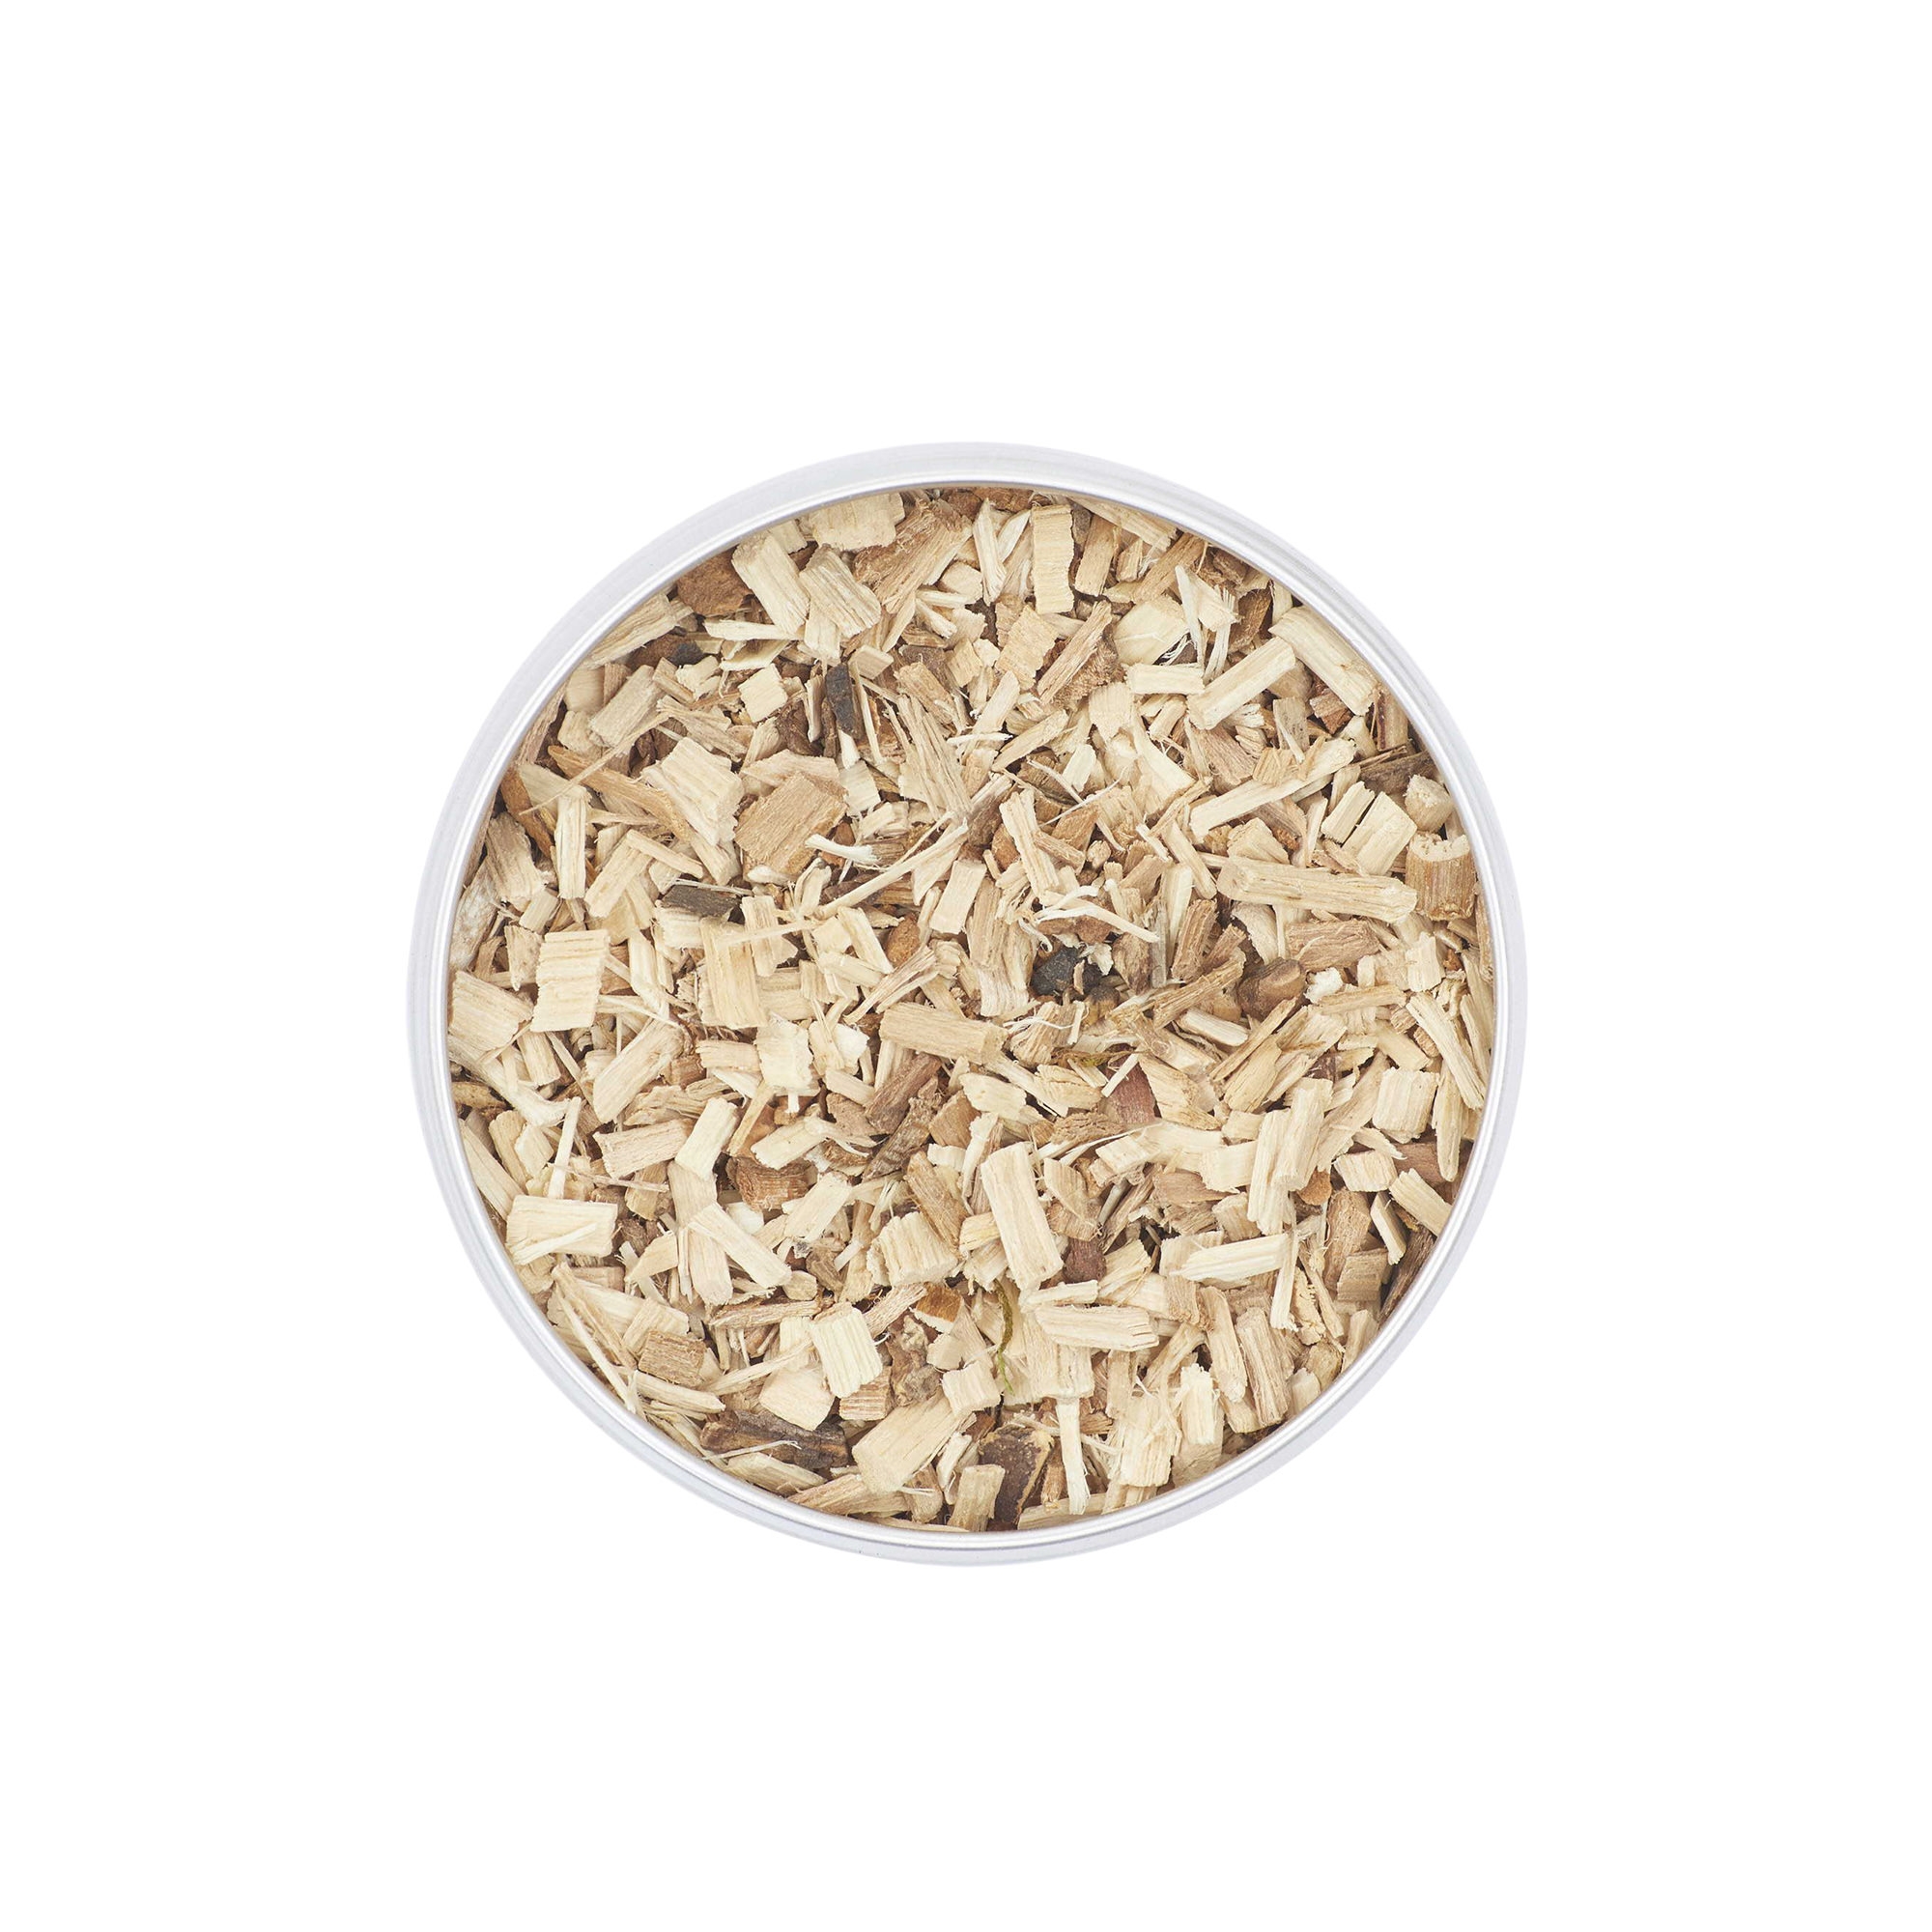 Davis & Waddell Wood Chips for Infusion Smoker 30g Applewood Image 2